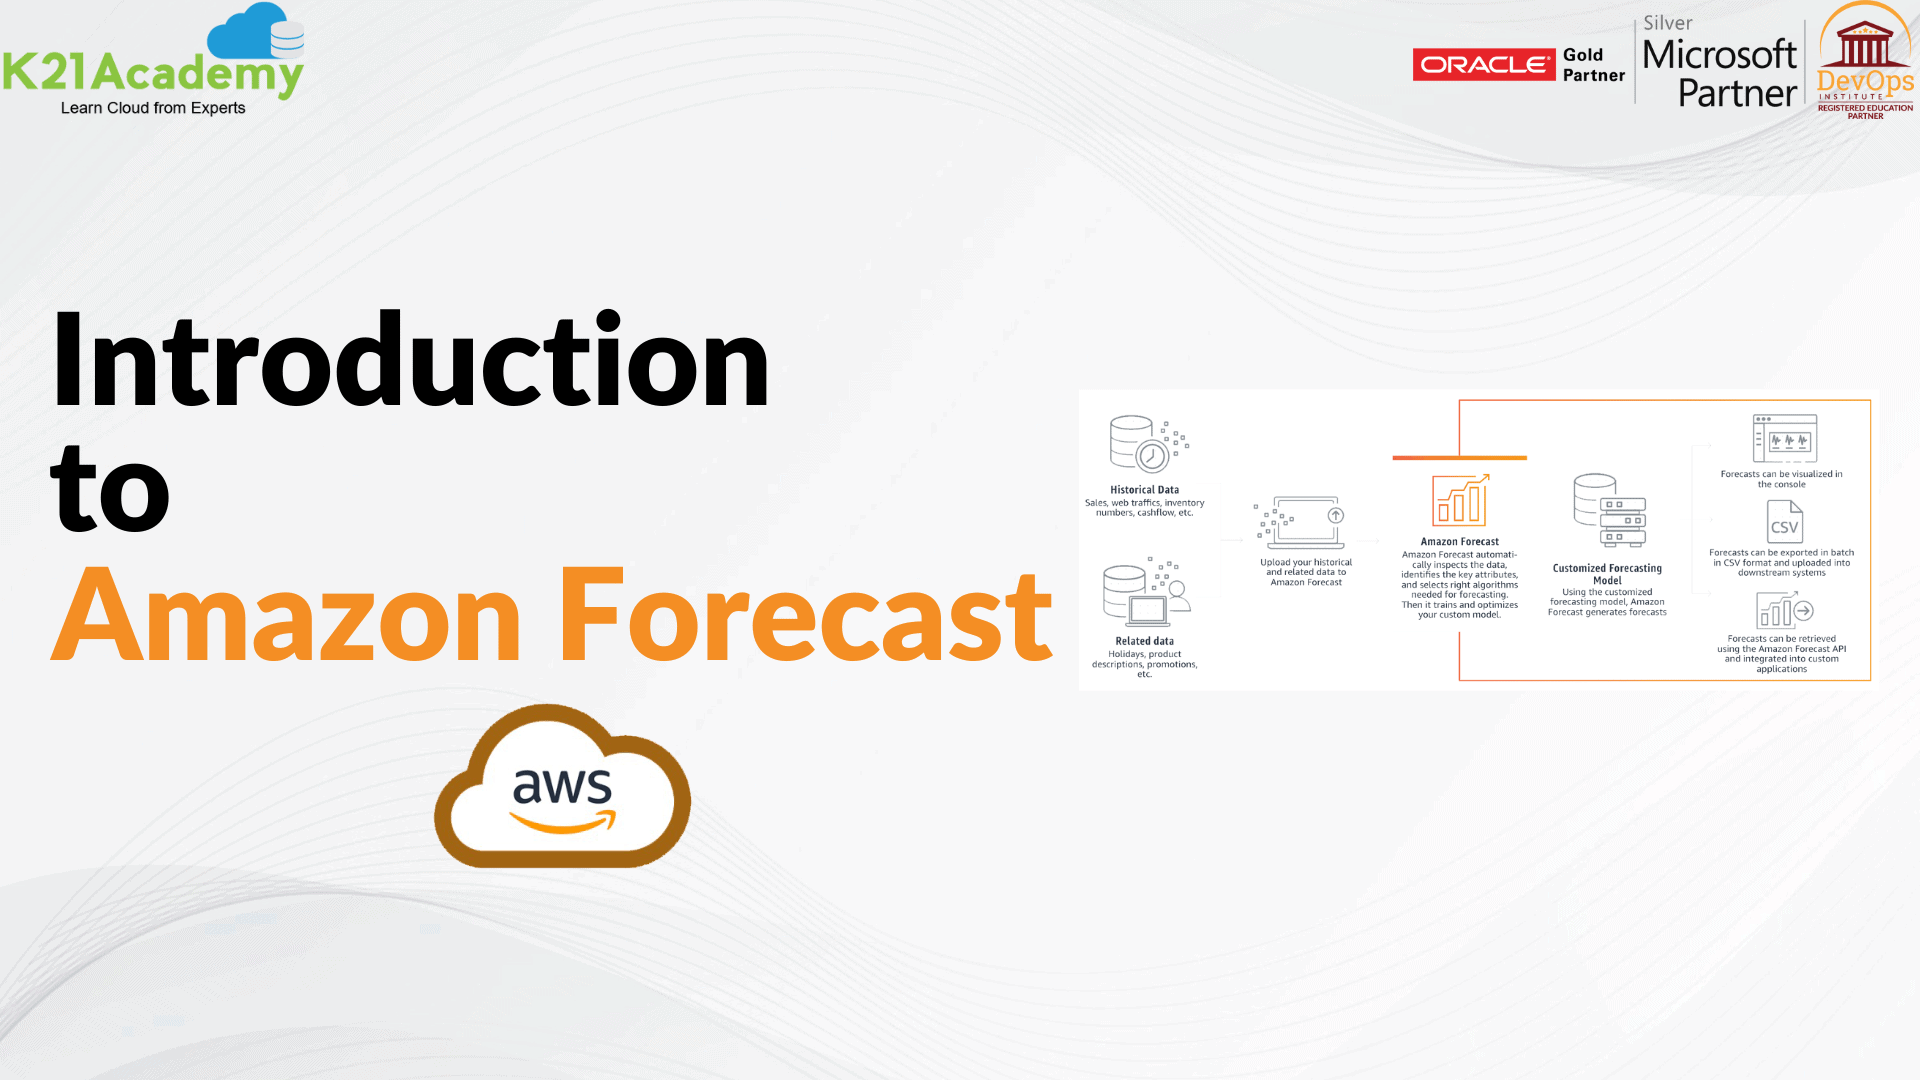 Amazon Forecast Overview, Workflow, Benefits & Use Cases